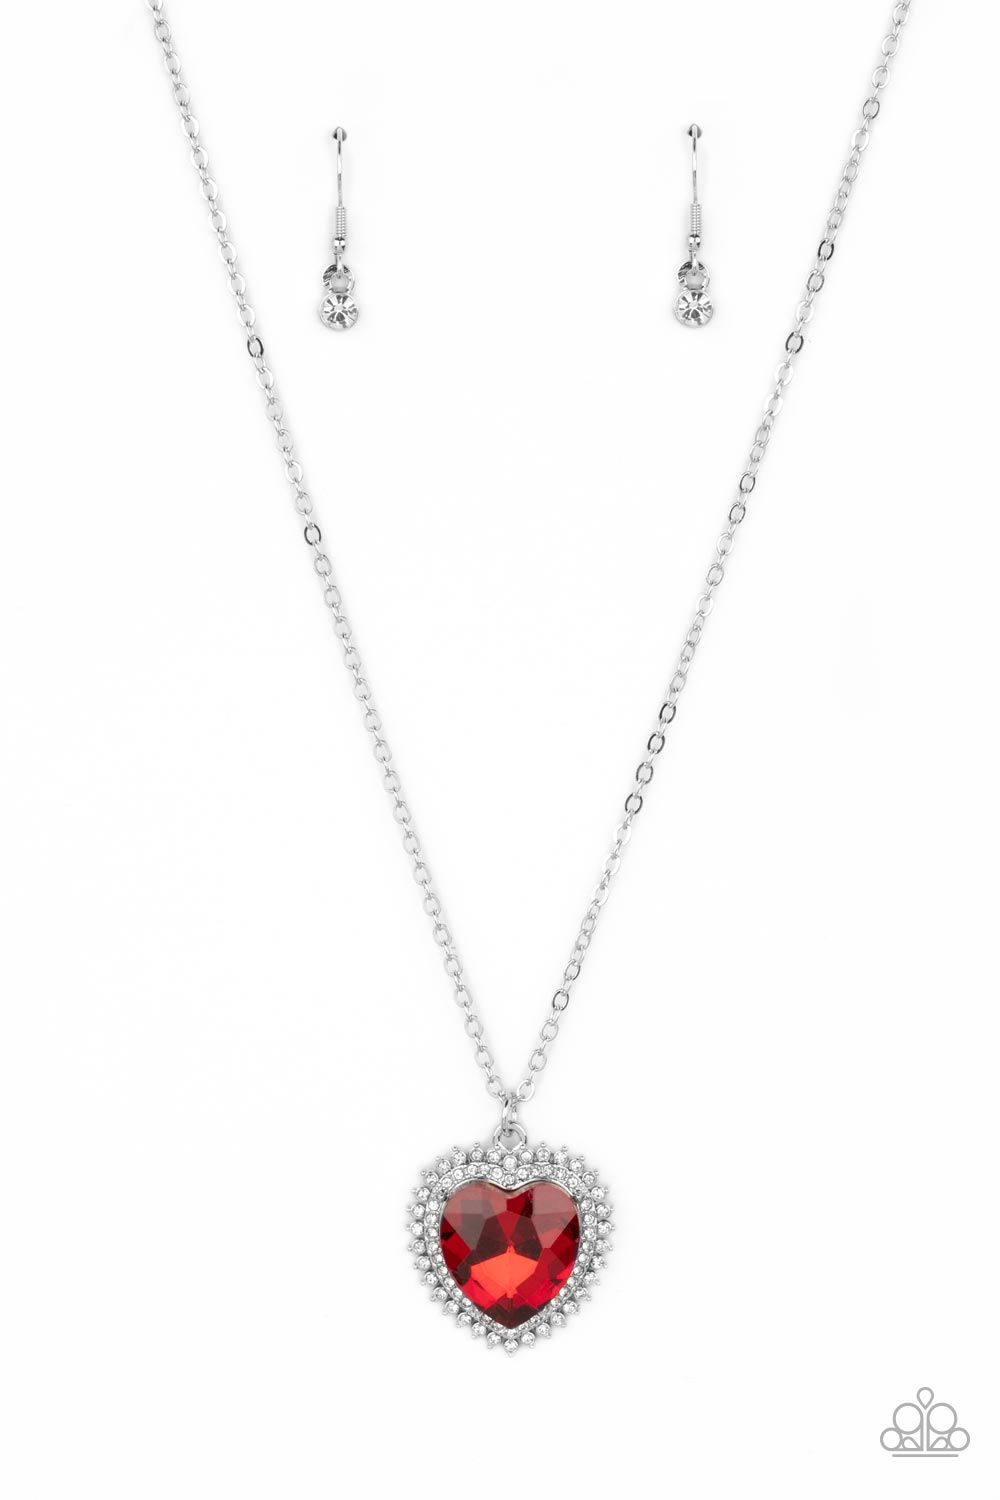 Sweethearts Stroll Red Rhinestone Heart Necklace - Paparazzi Accessories- lightbox - CarasShop.com - $5 Jewelry by Cara Jewels